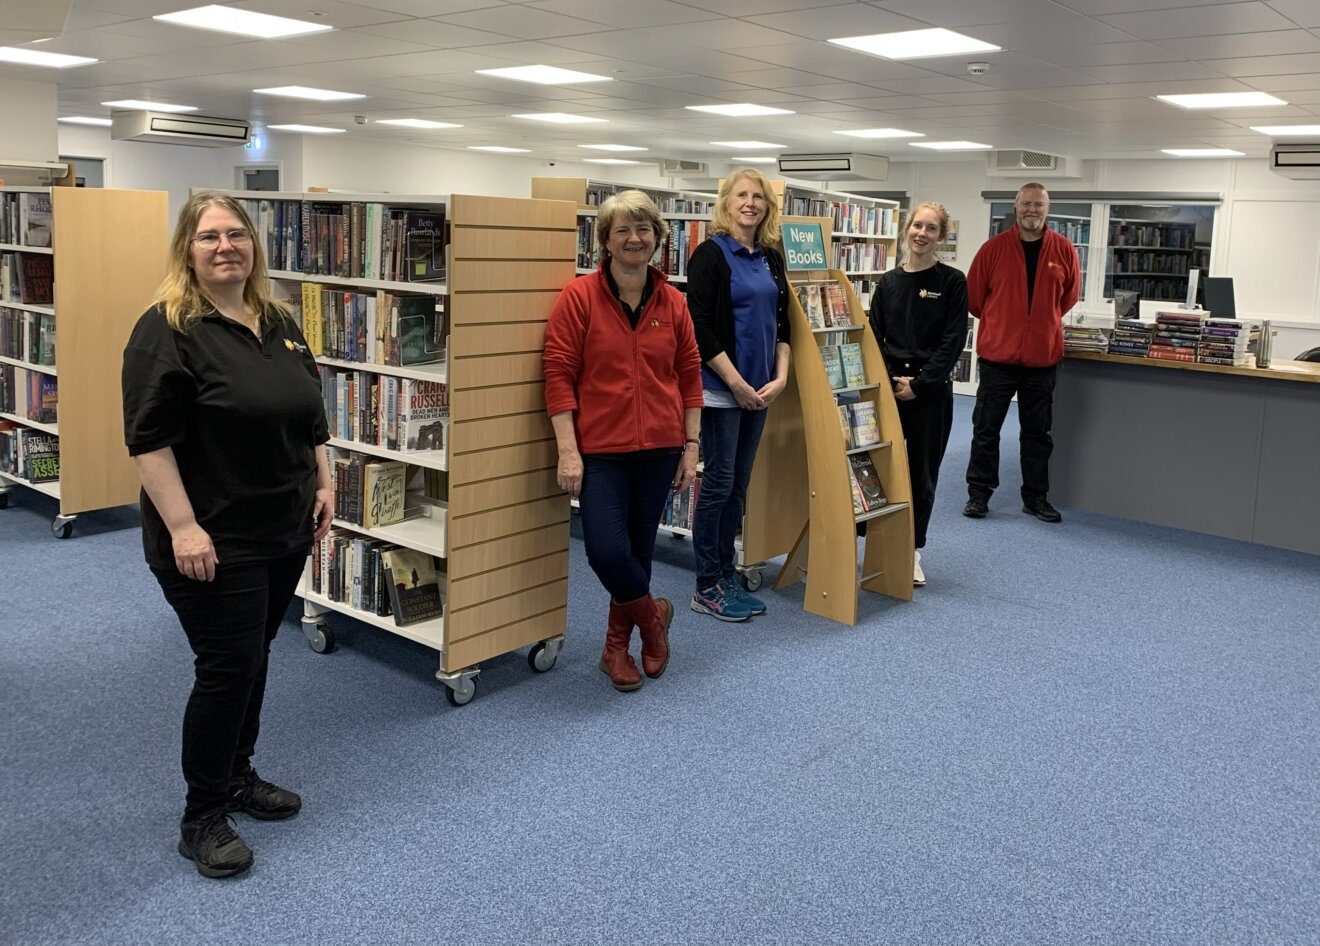 Books galore and a 'place to go': library prepares to open doors after big move